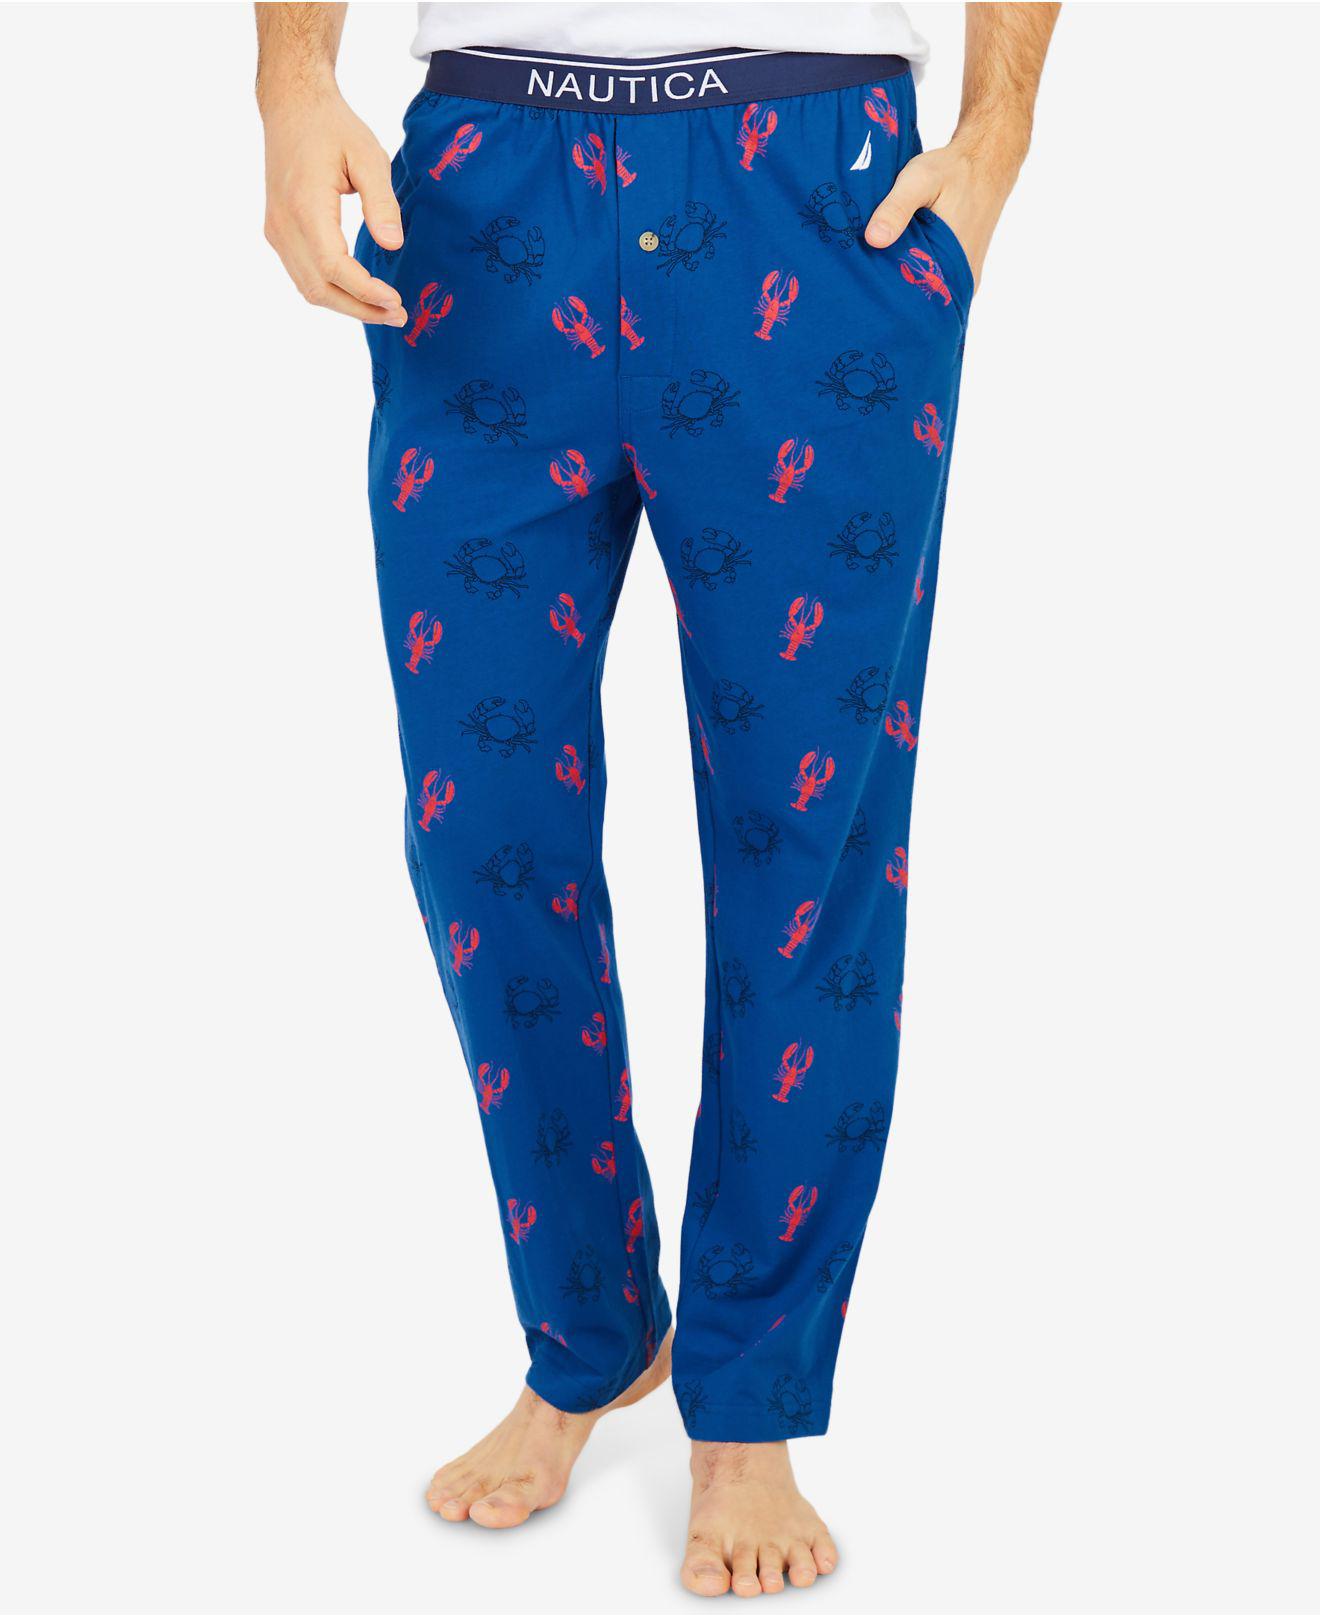 Nautica Crab & Lobster Print Cotton Pajama Pants in Blue for Men - Lyst